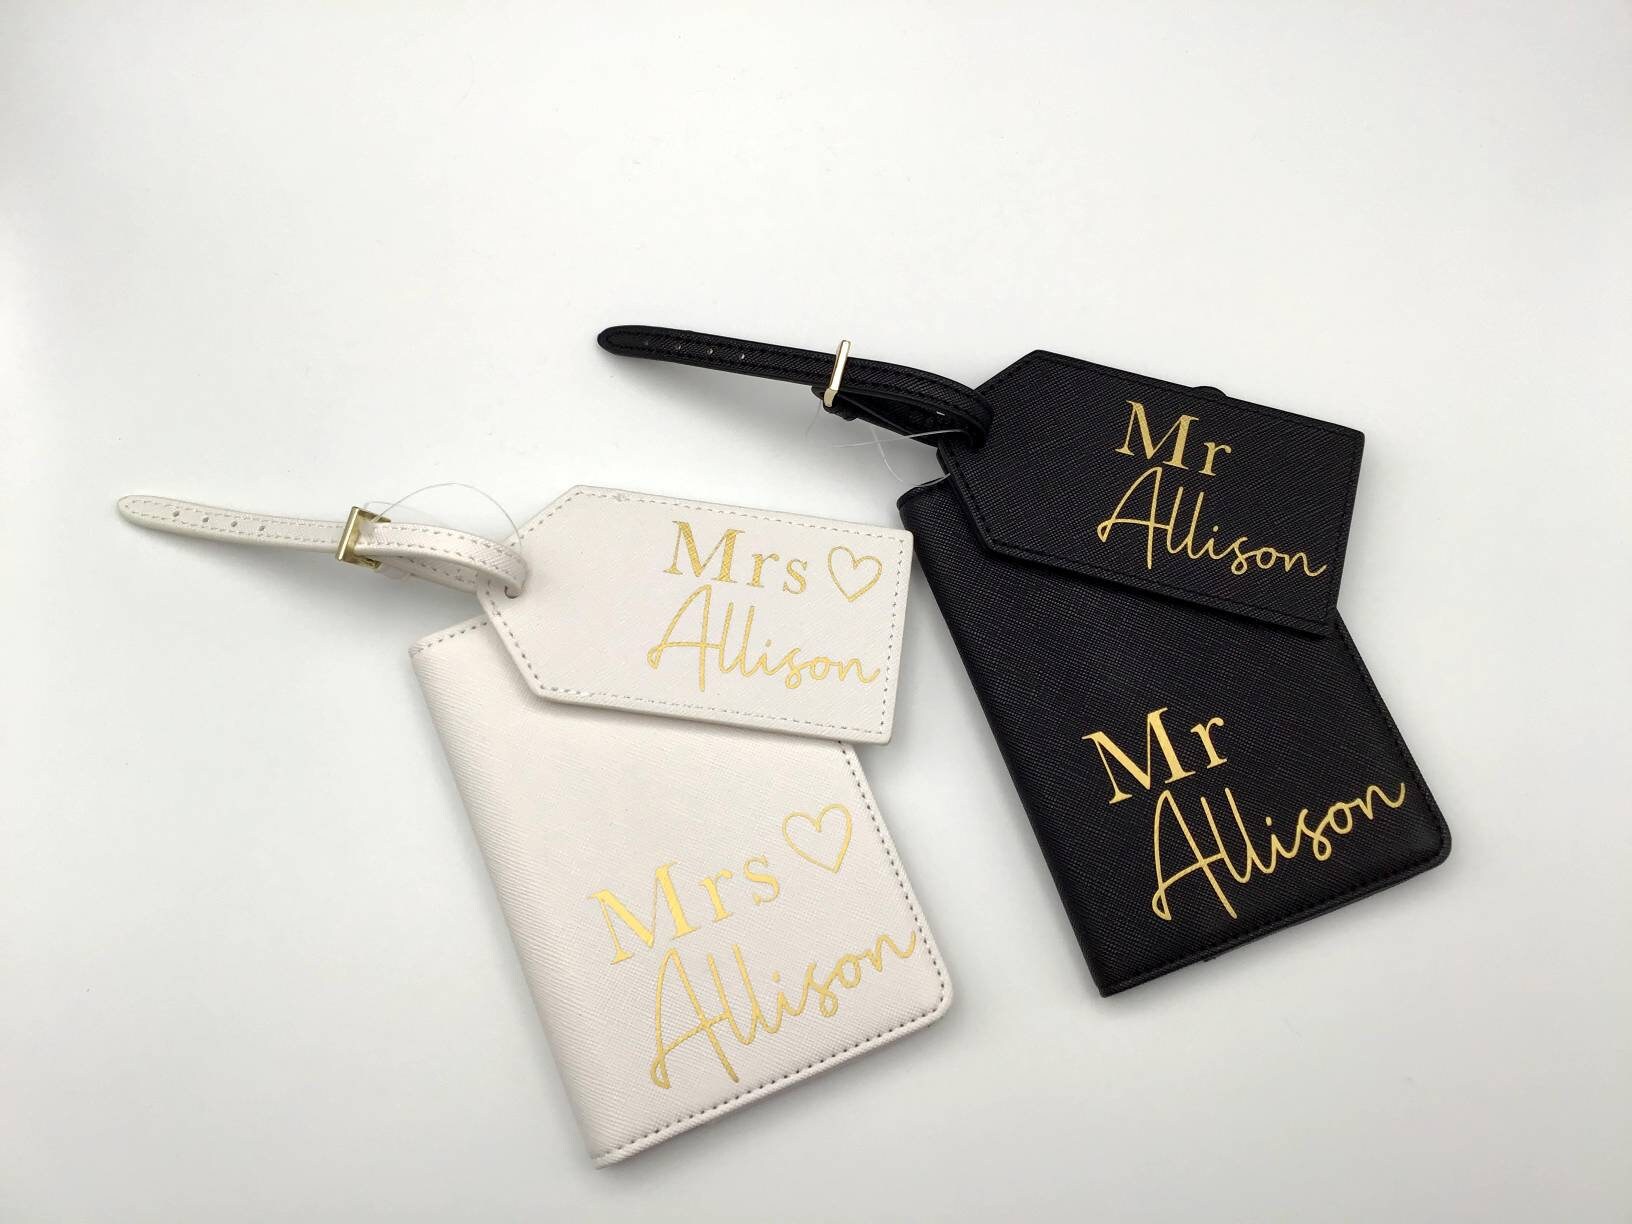 Mr and Mrs Passport cover and luggage tag set his and hers | Etsy